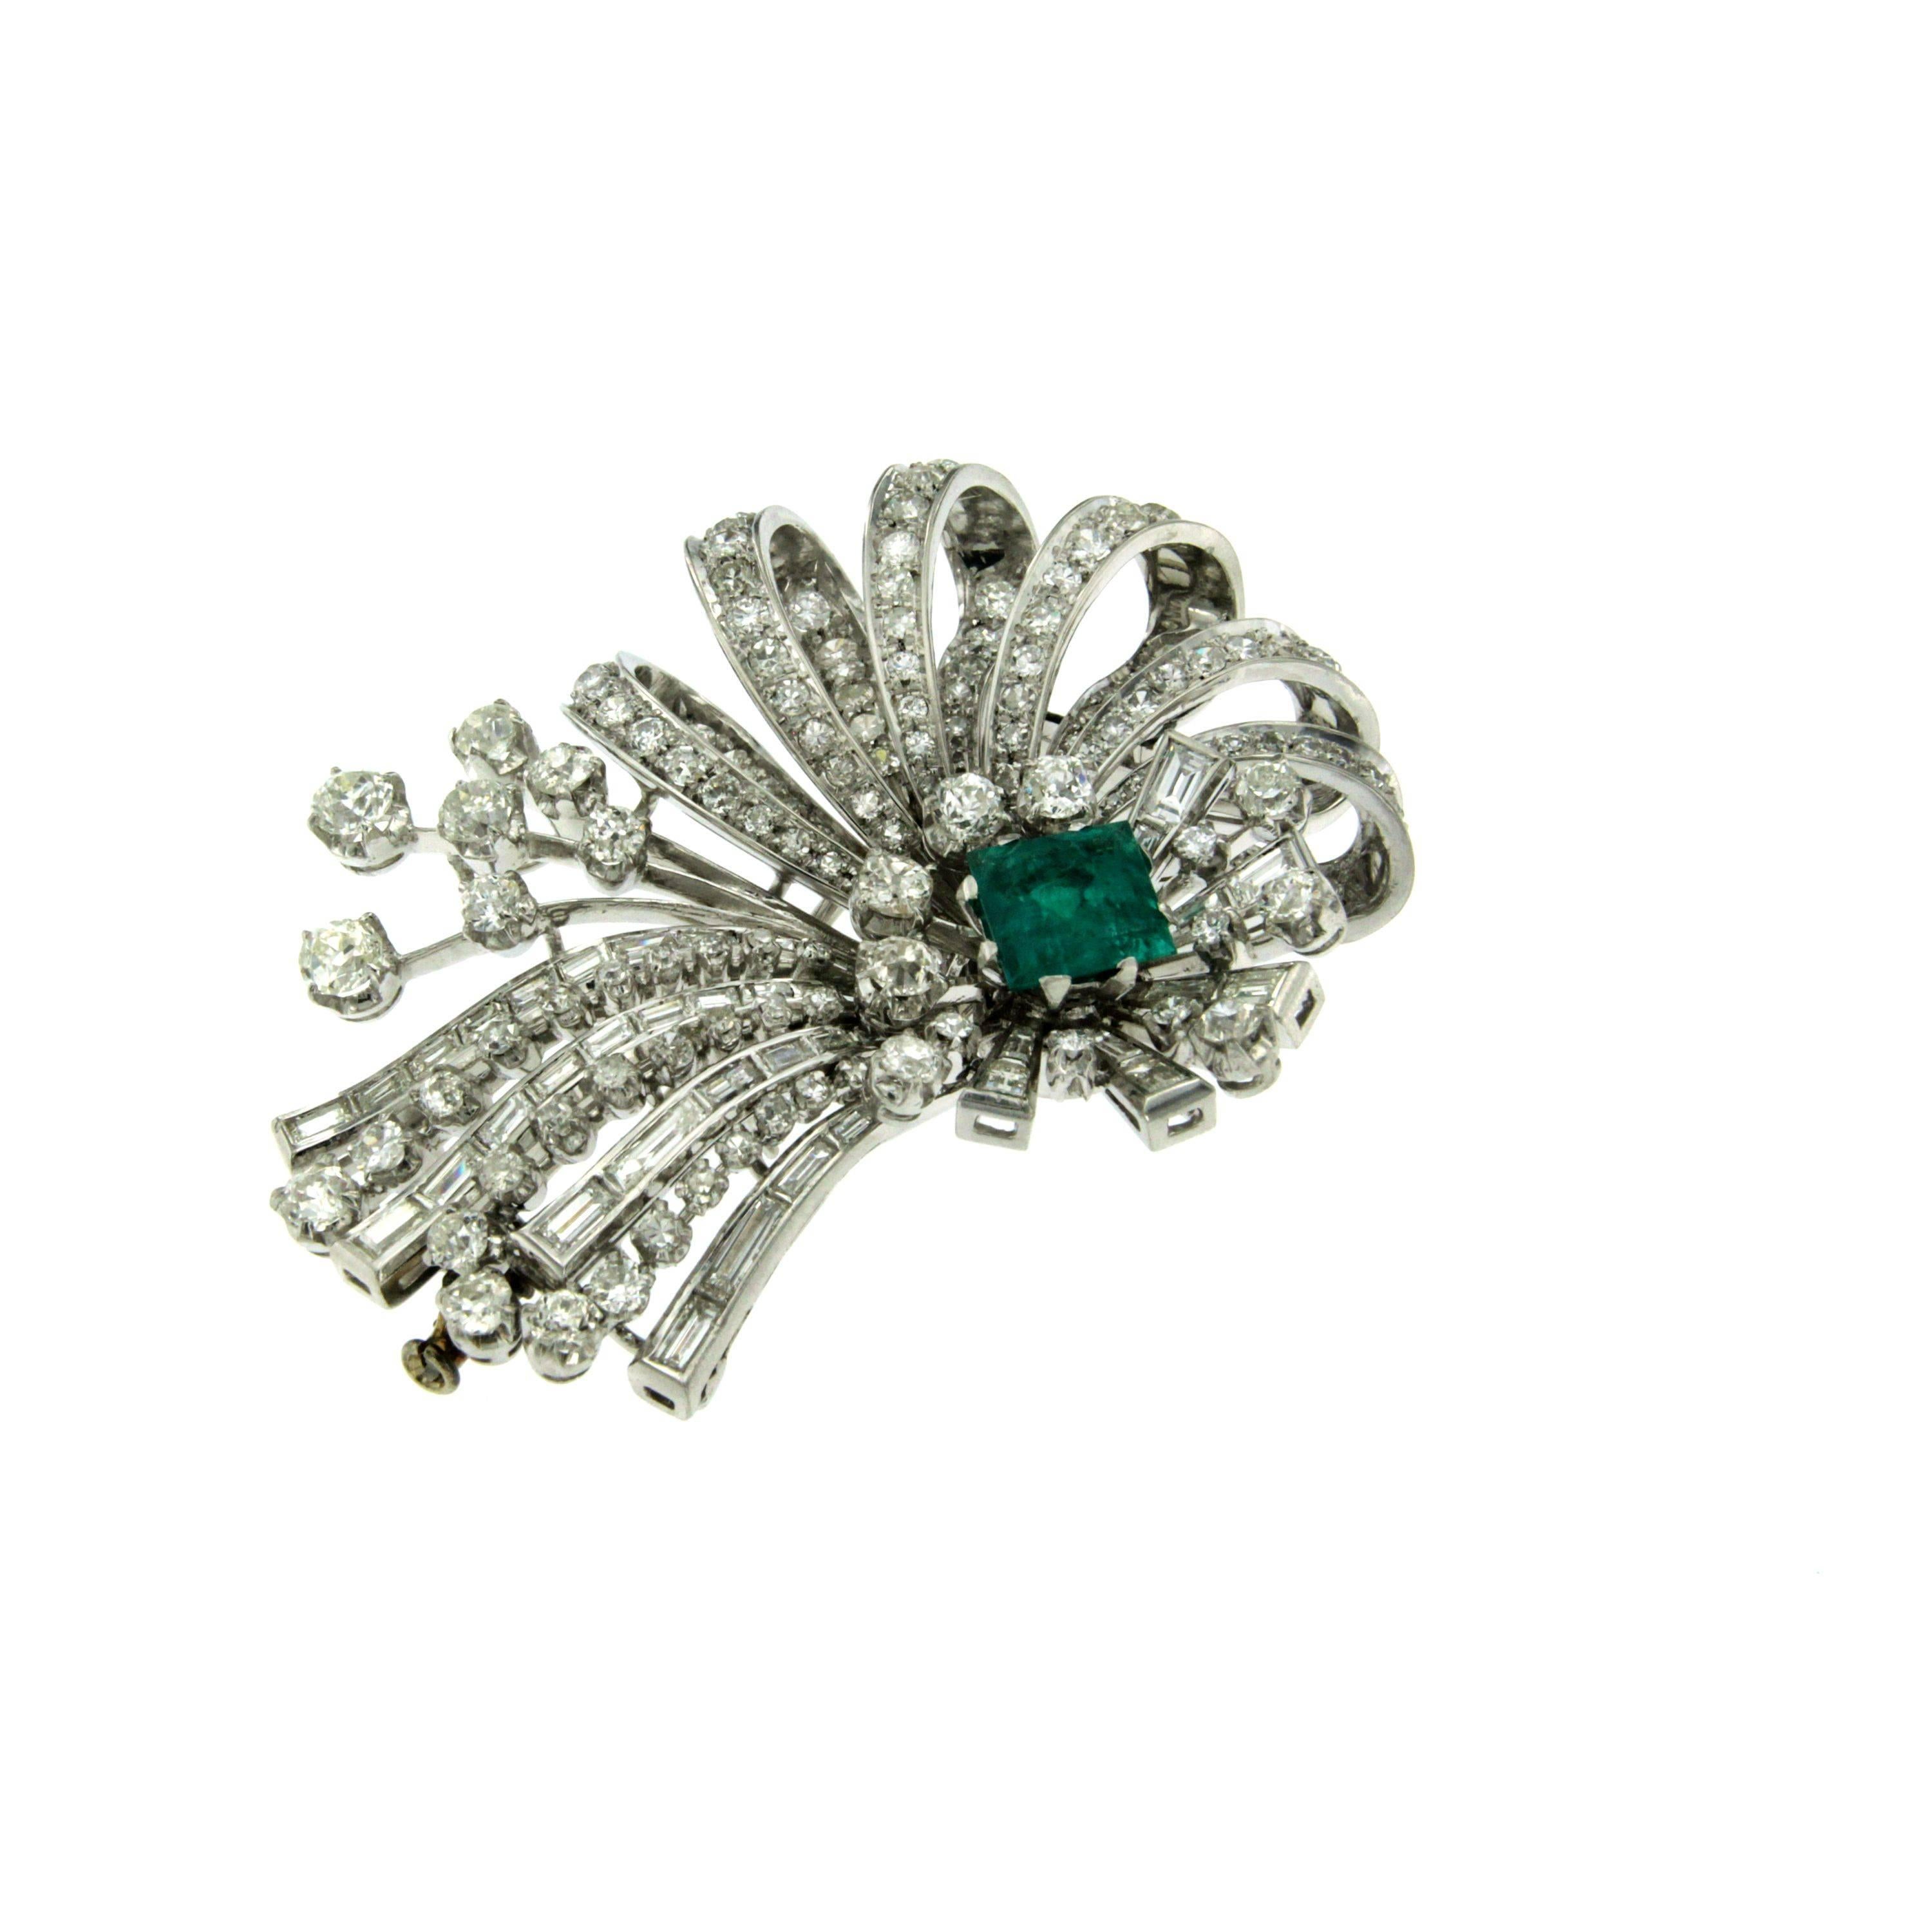 A fabulous Art Deco flower brooch set with a Natural Colombian Emerald weighing 3.50 ct and Diamond Round and Baguette cut, weighing 10.00 total carats, graded G color Vvs Clarity.
Handmade Platinum mounting; 
T
his piece is designed and crafted